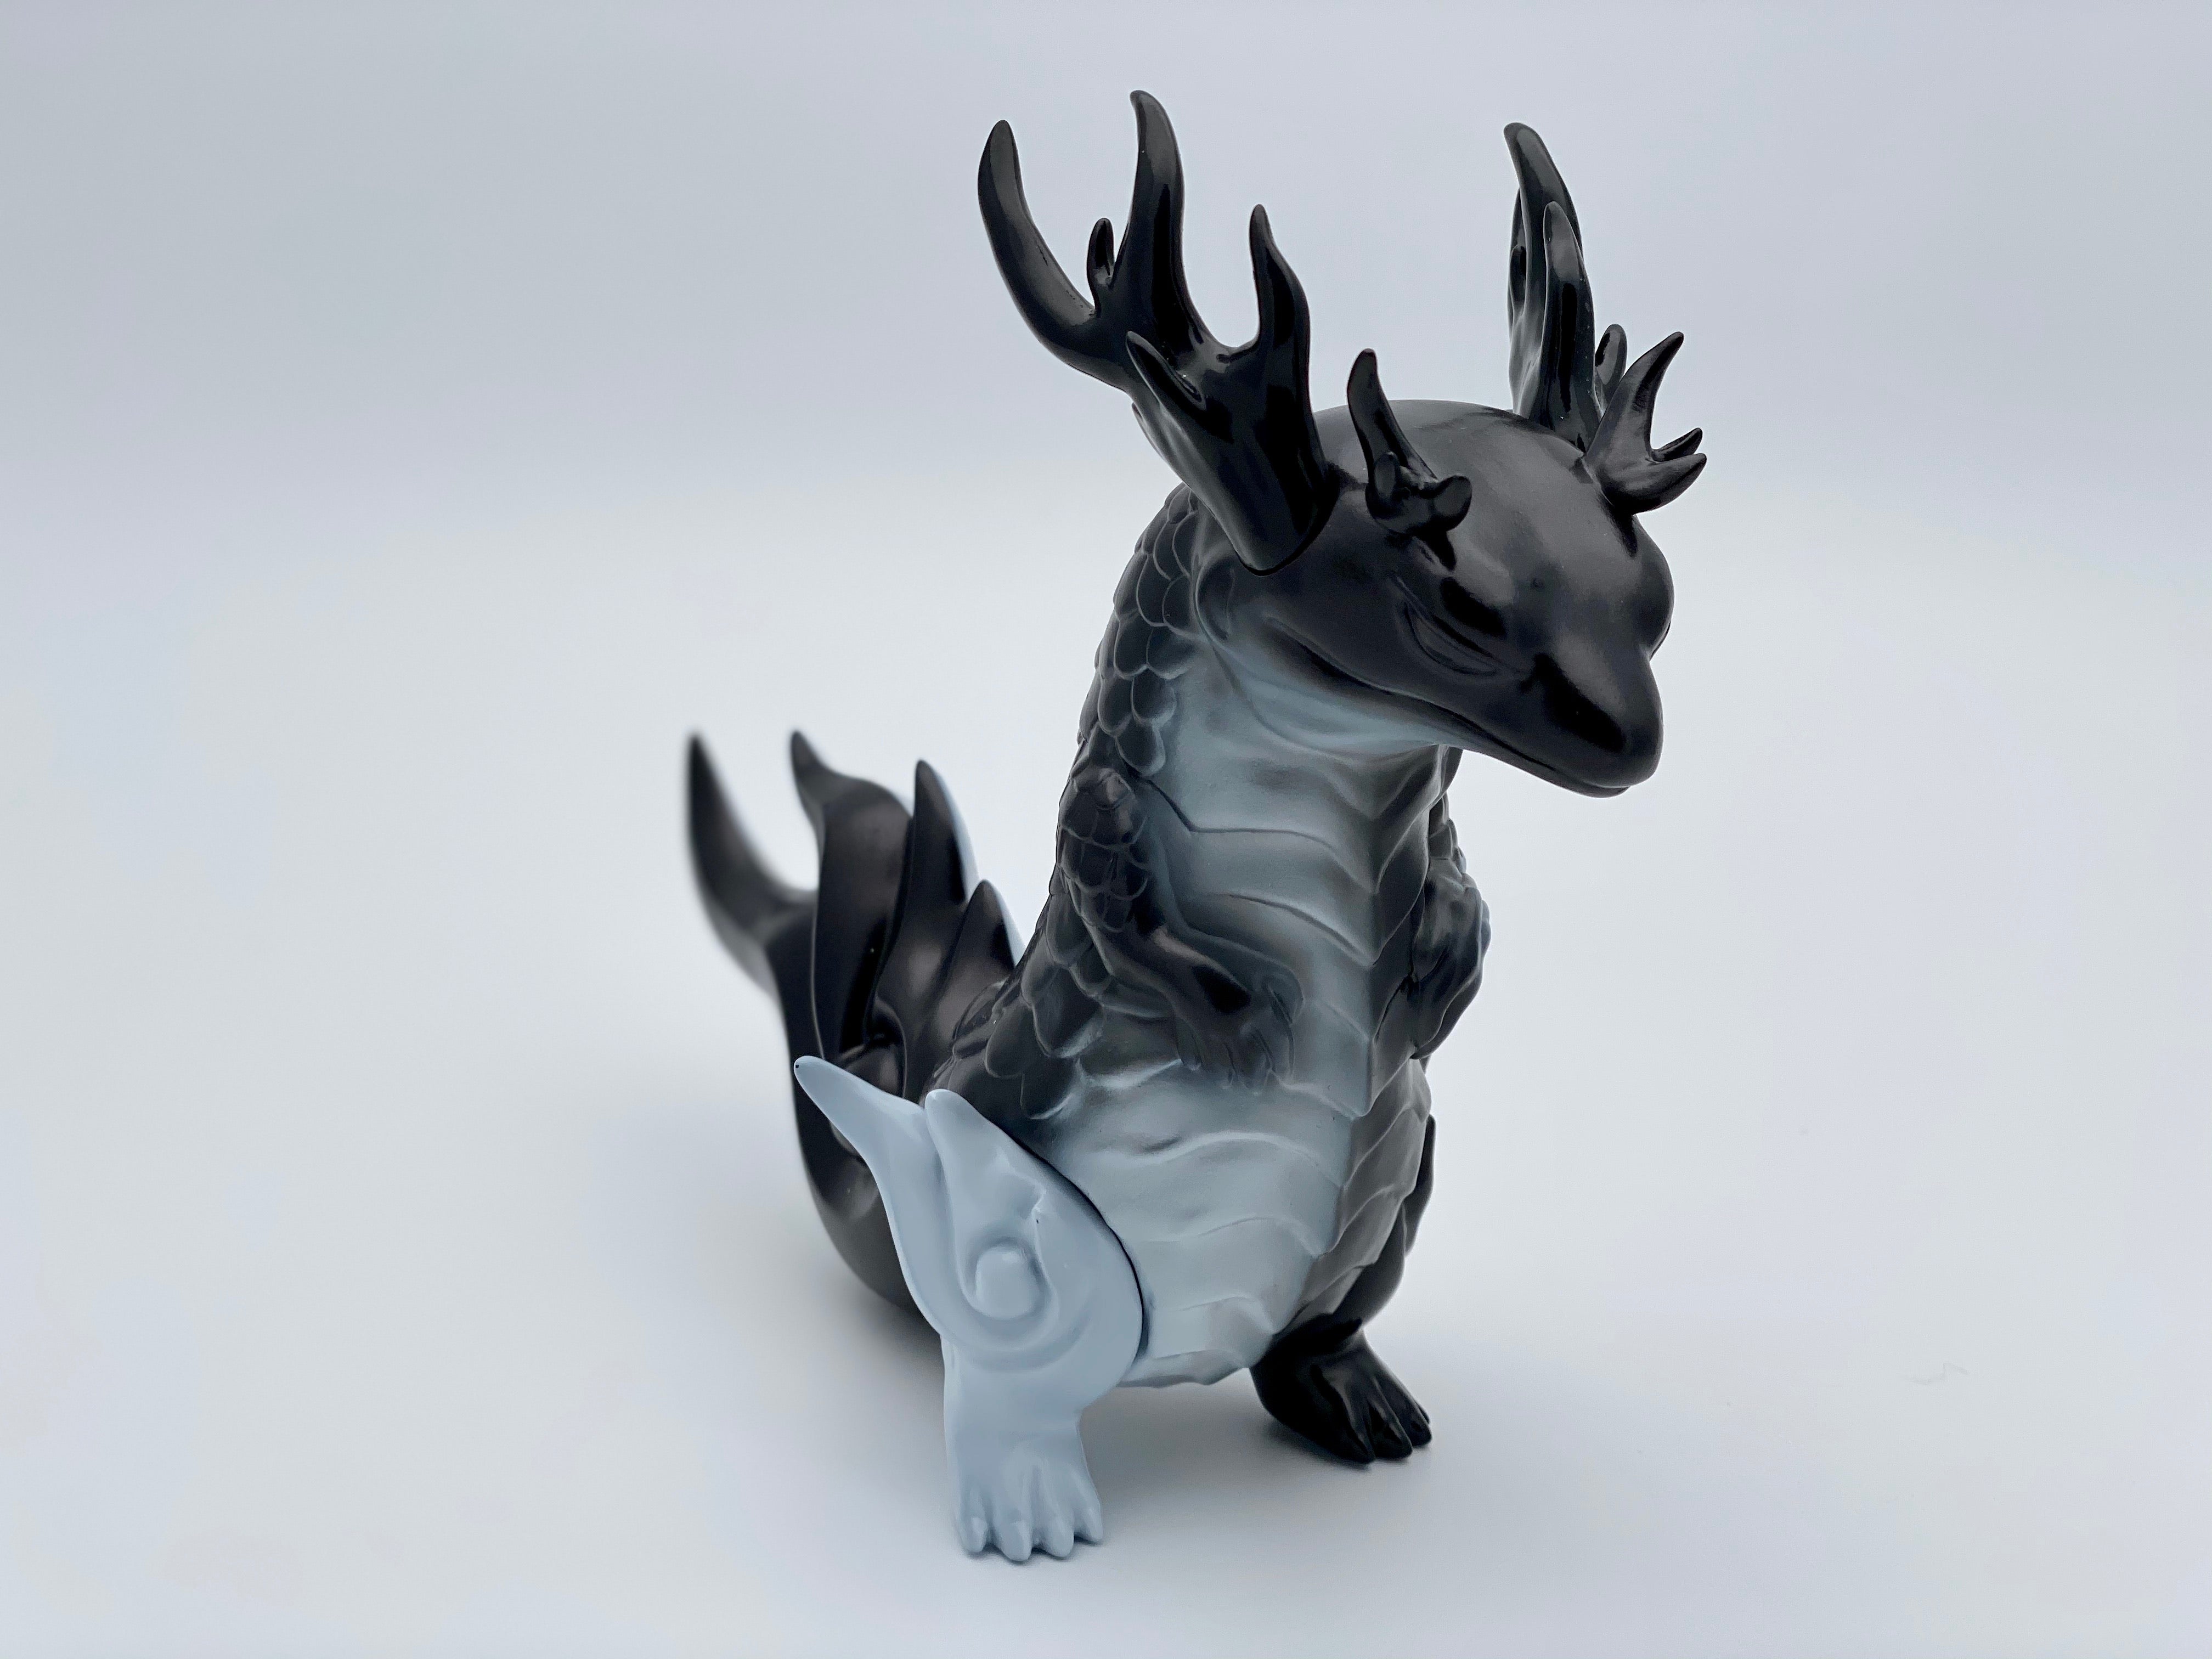 Japanese Soft Vinyl animal figure, Rinkaku - Mira By CORE Kashi, 15cm tall, 18cm nose to tail, featuring a black and white toy dragon.